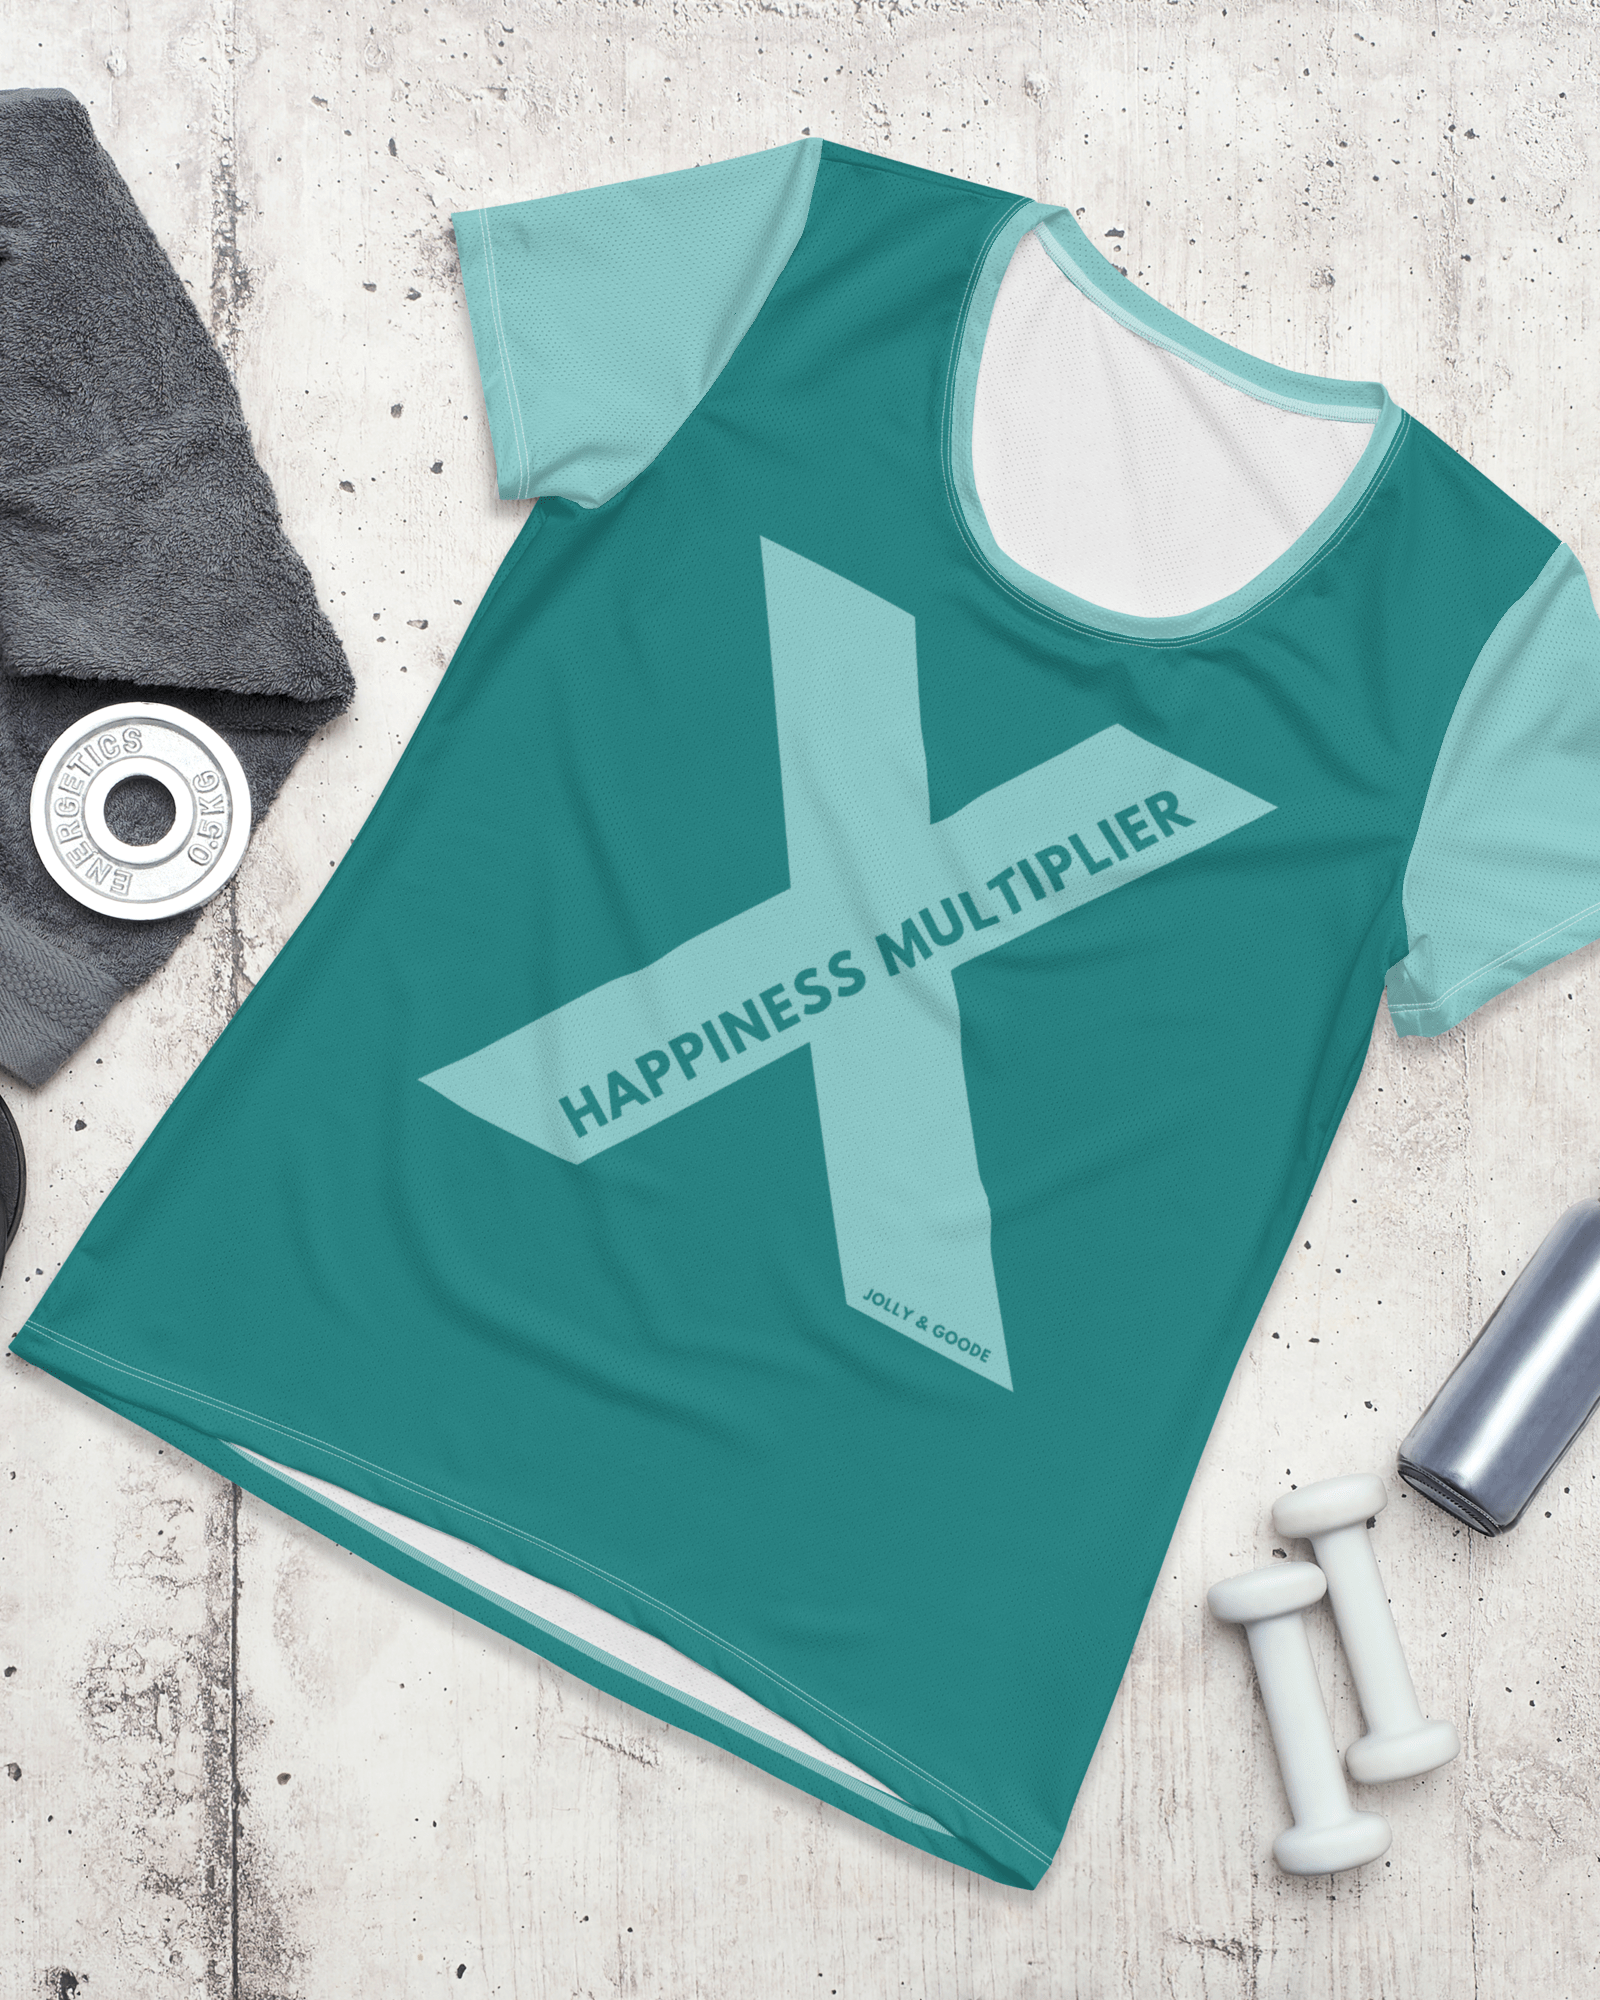 Happiness Multiplier Women's Athletic Shirt in Cool XS Crop Tops Jolly & Goode